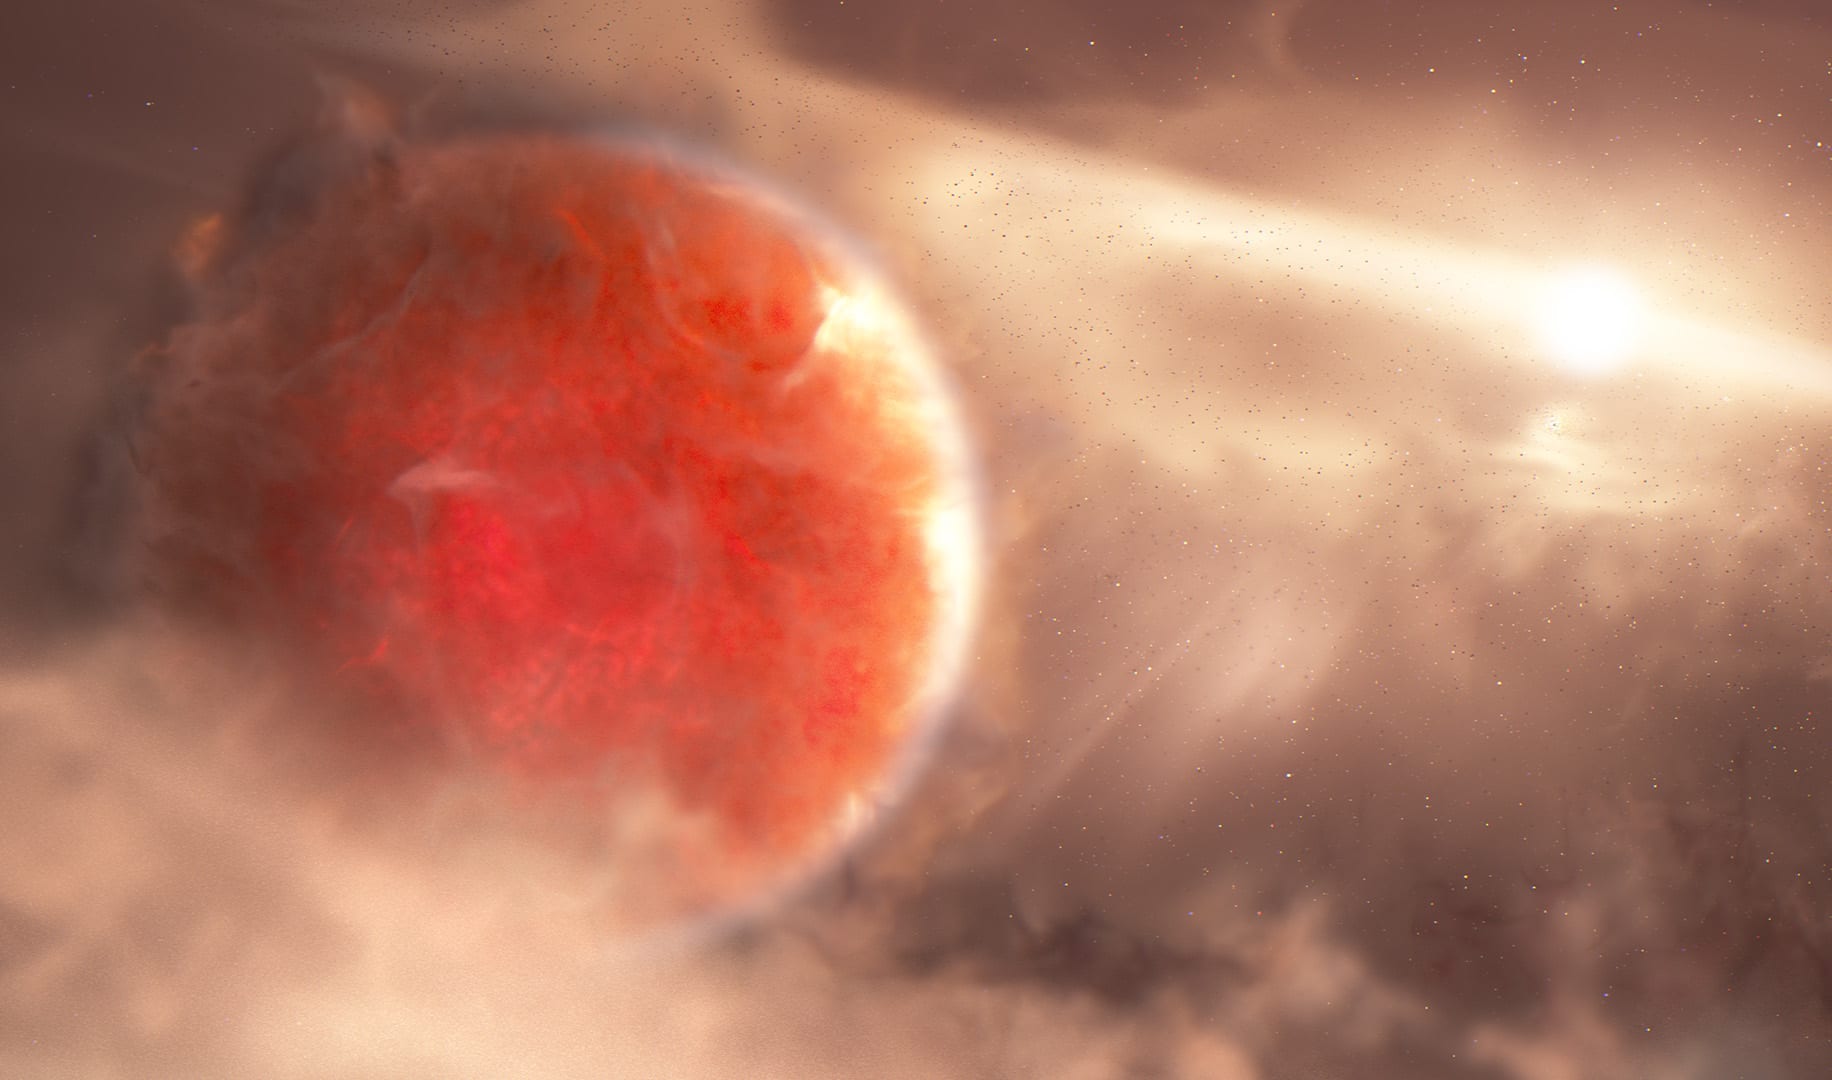 Artist's impression of AB Aurigae b, which is estimated to be nine times more massive than Jupiter.